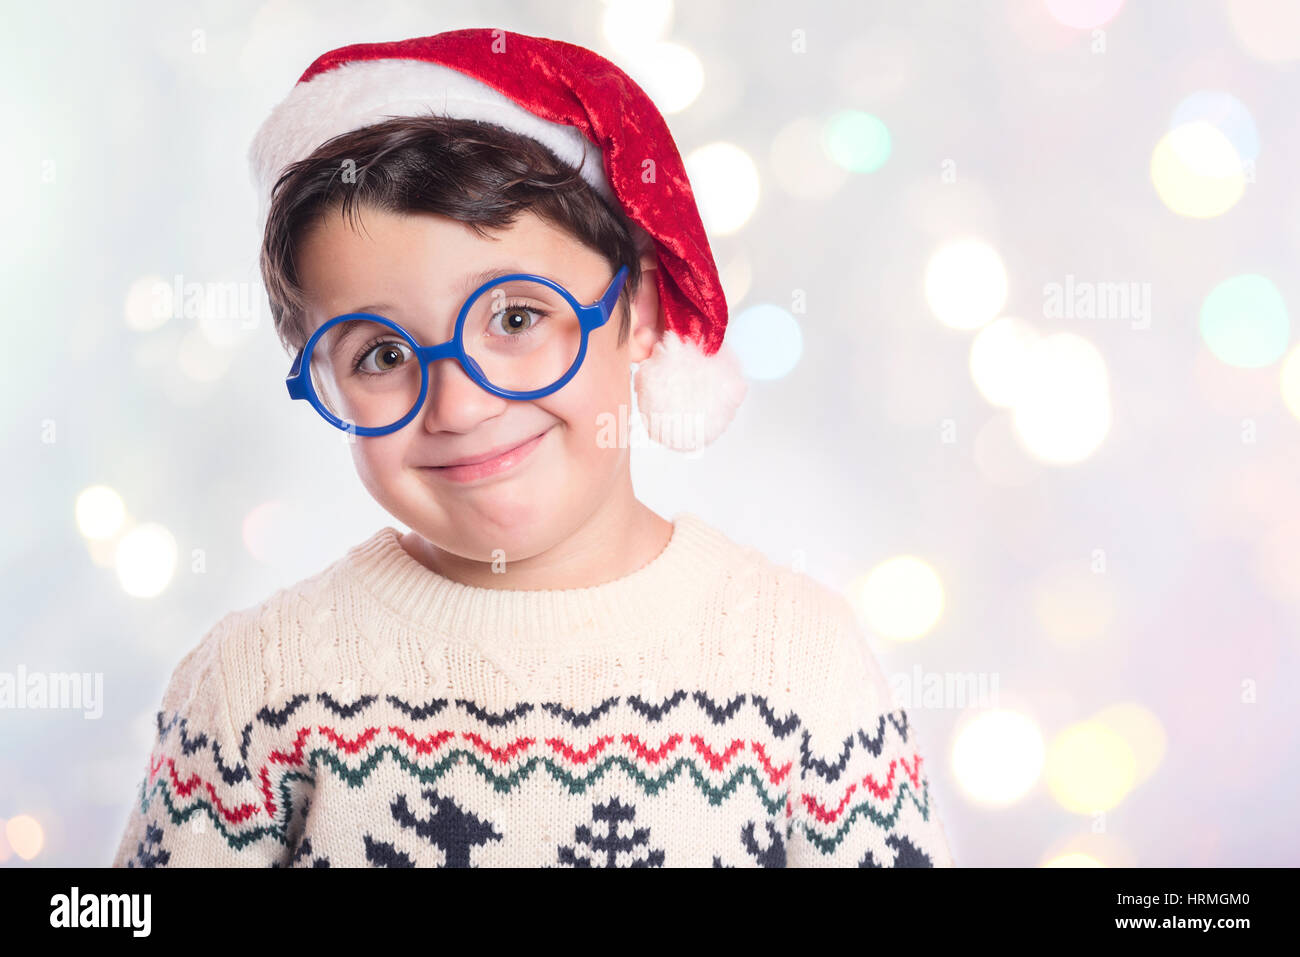 Little boy smiling at christmas Stock Photo